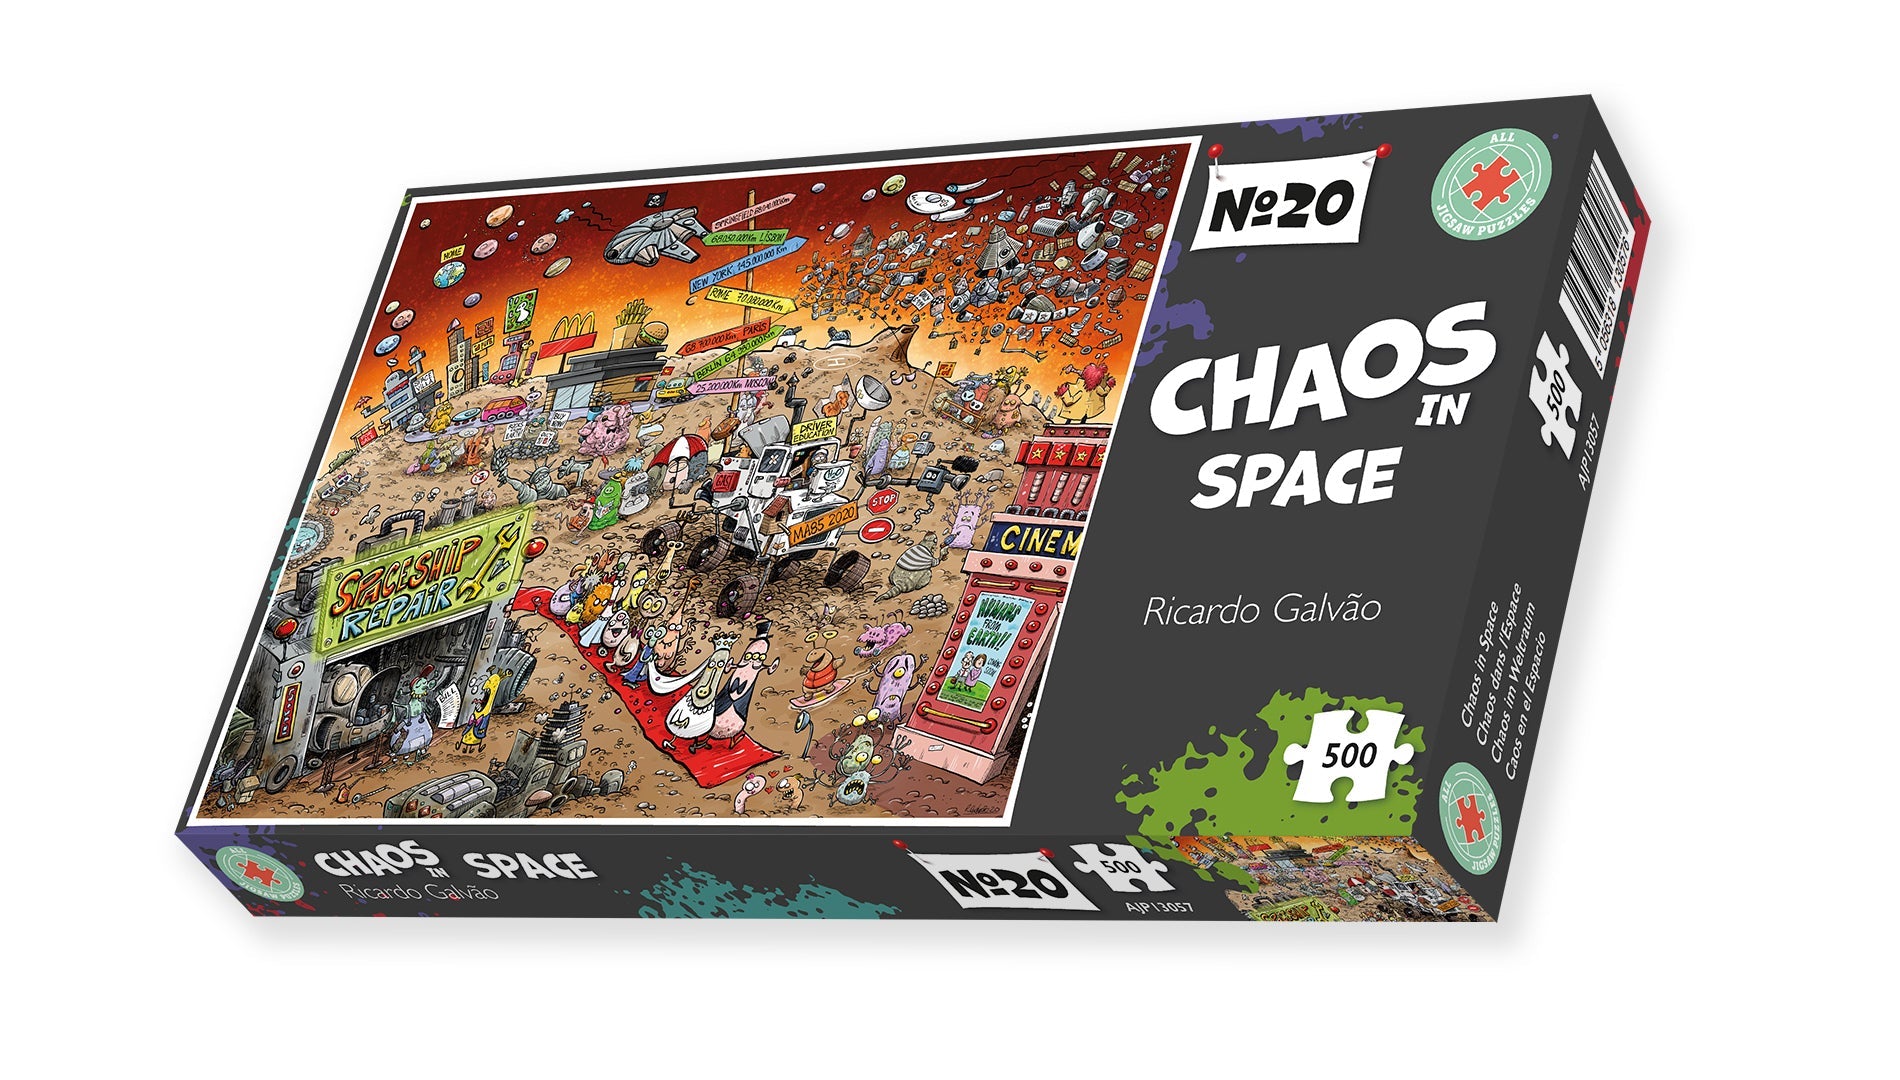 Chaos in Space 500 Piece Jigsaw Puzzle - Chaos no. 20